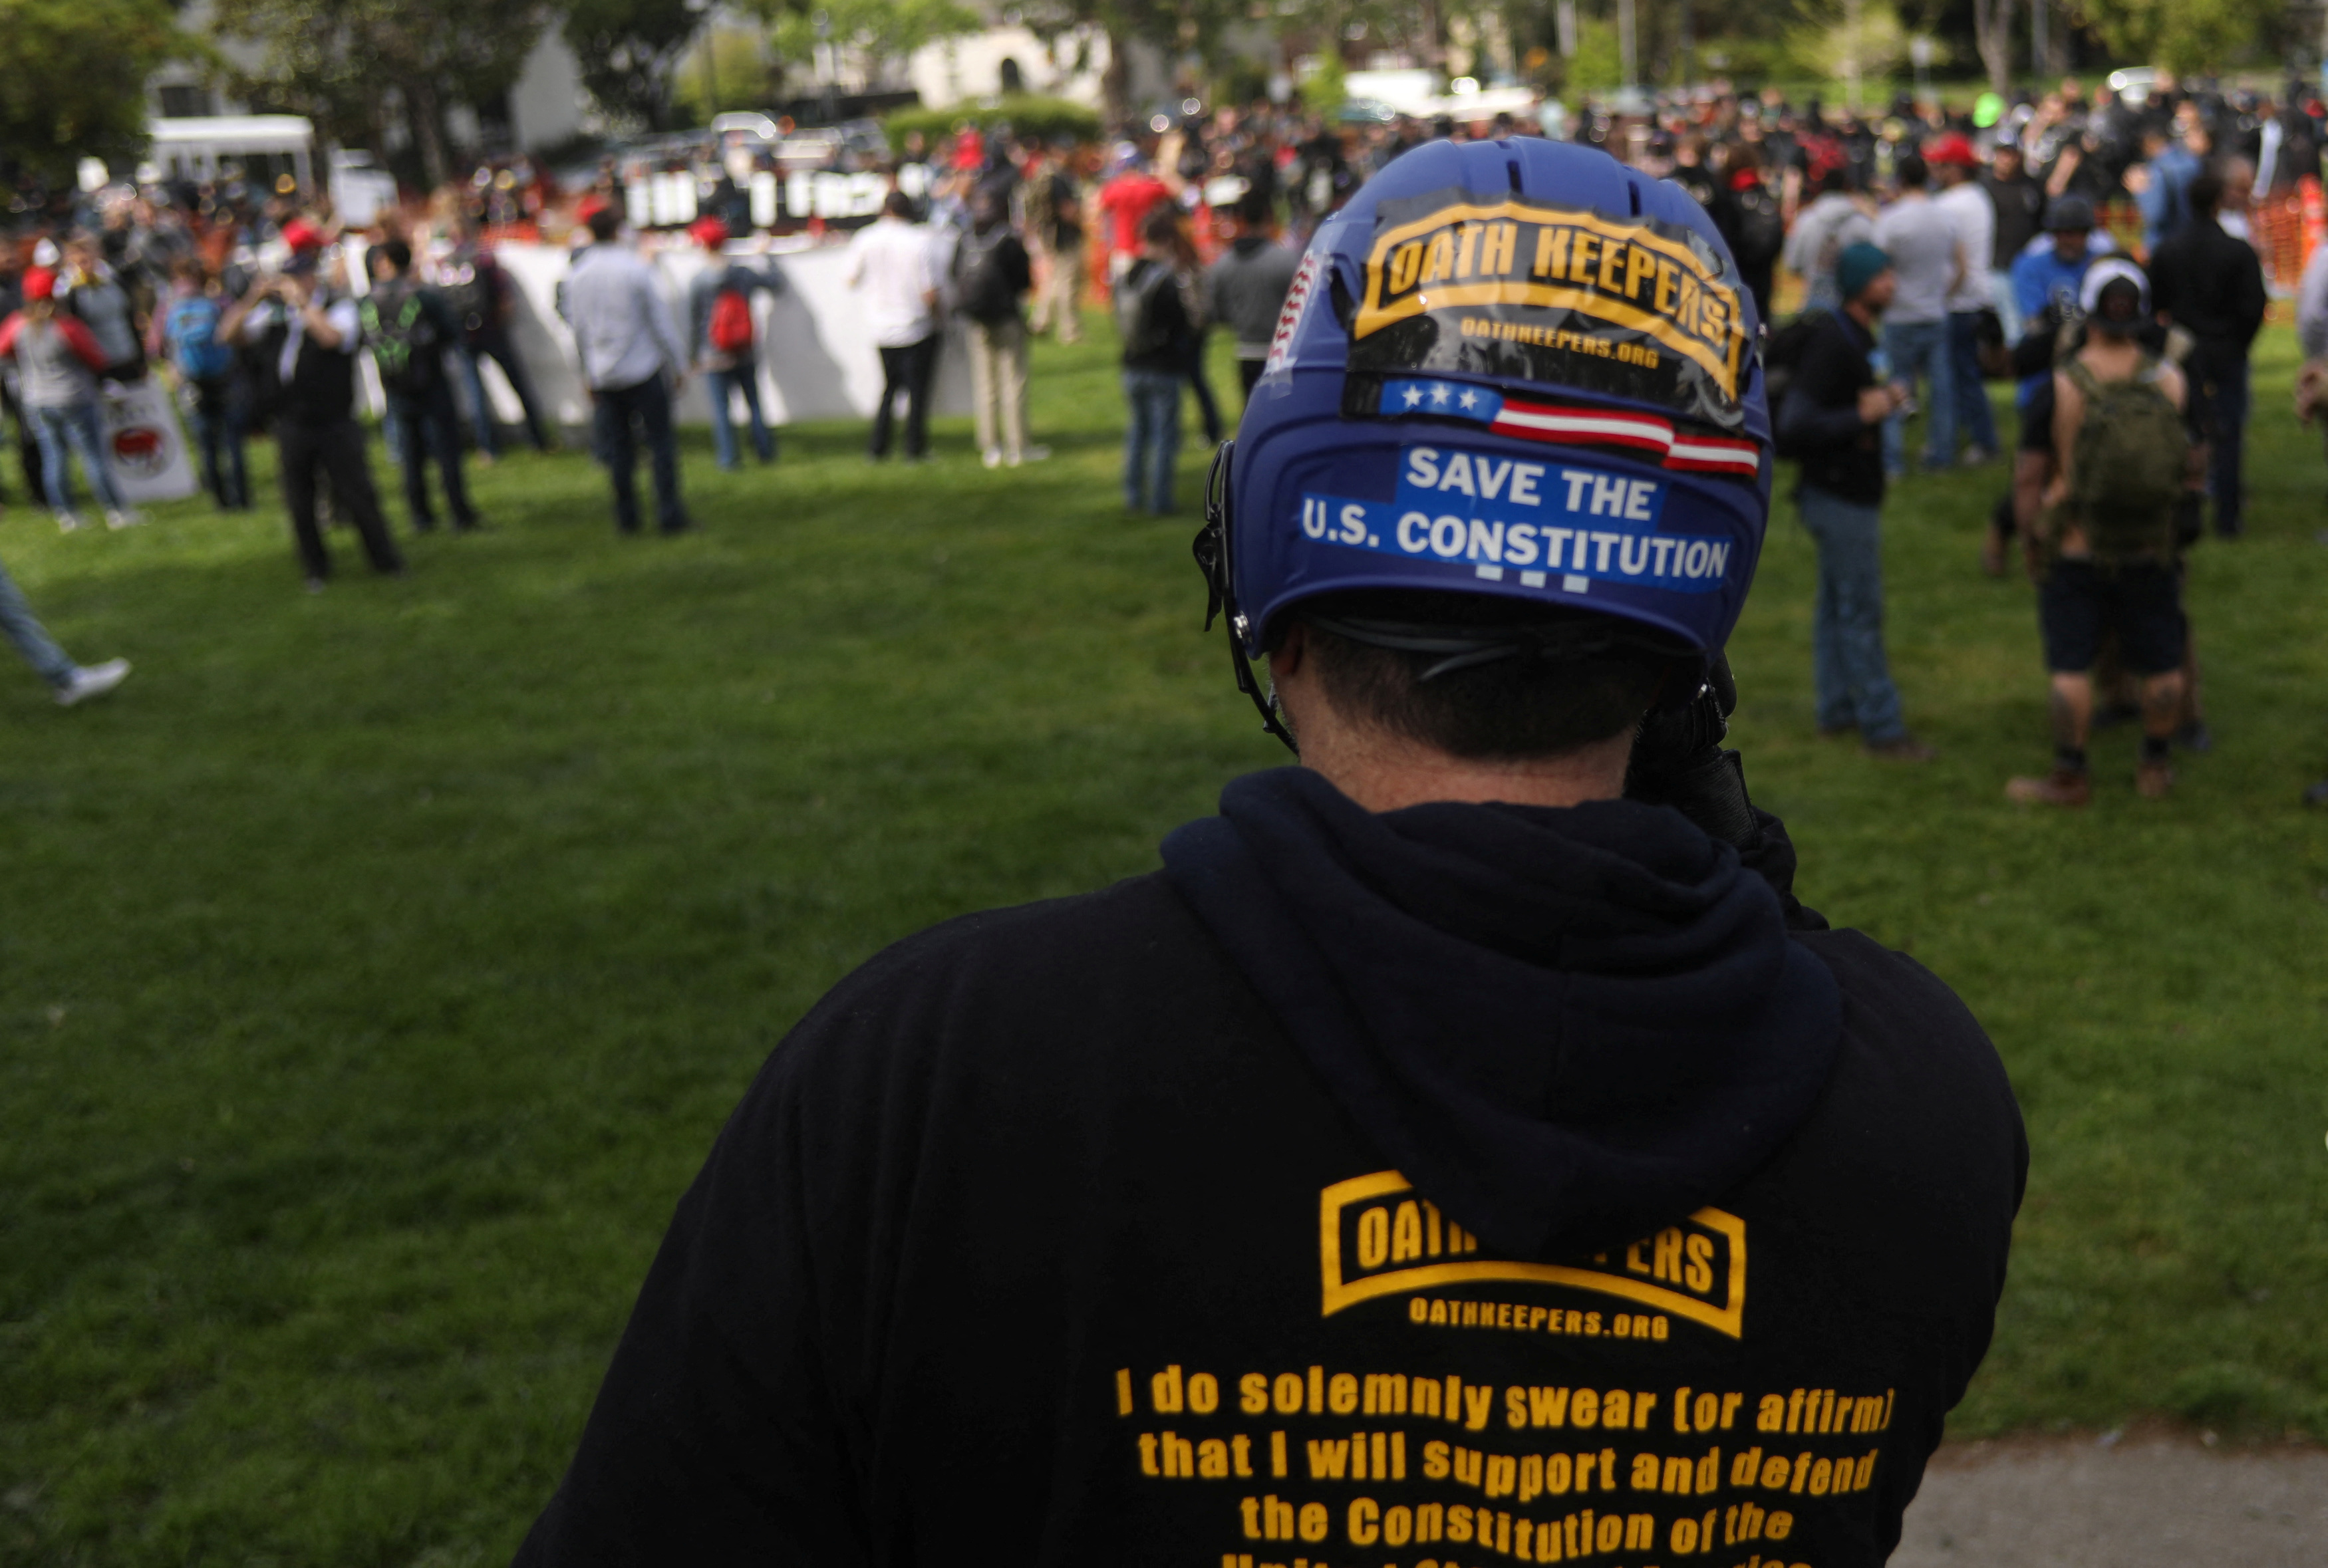 Members of the Oath Keepers provide security during the Patriots Day Free Speech Rally in Berkeley, California